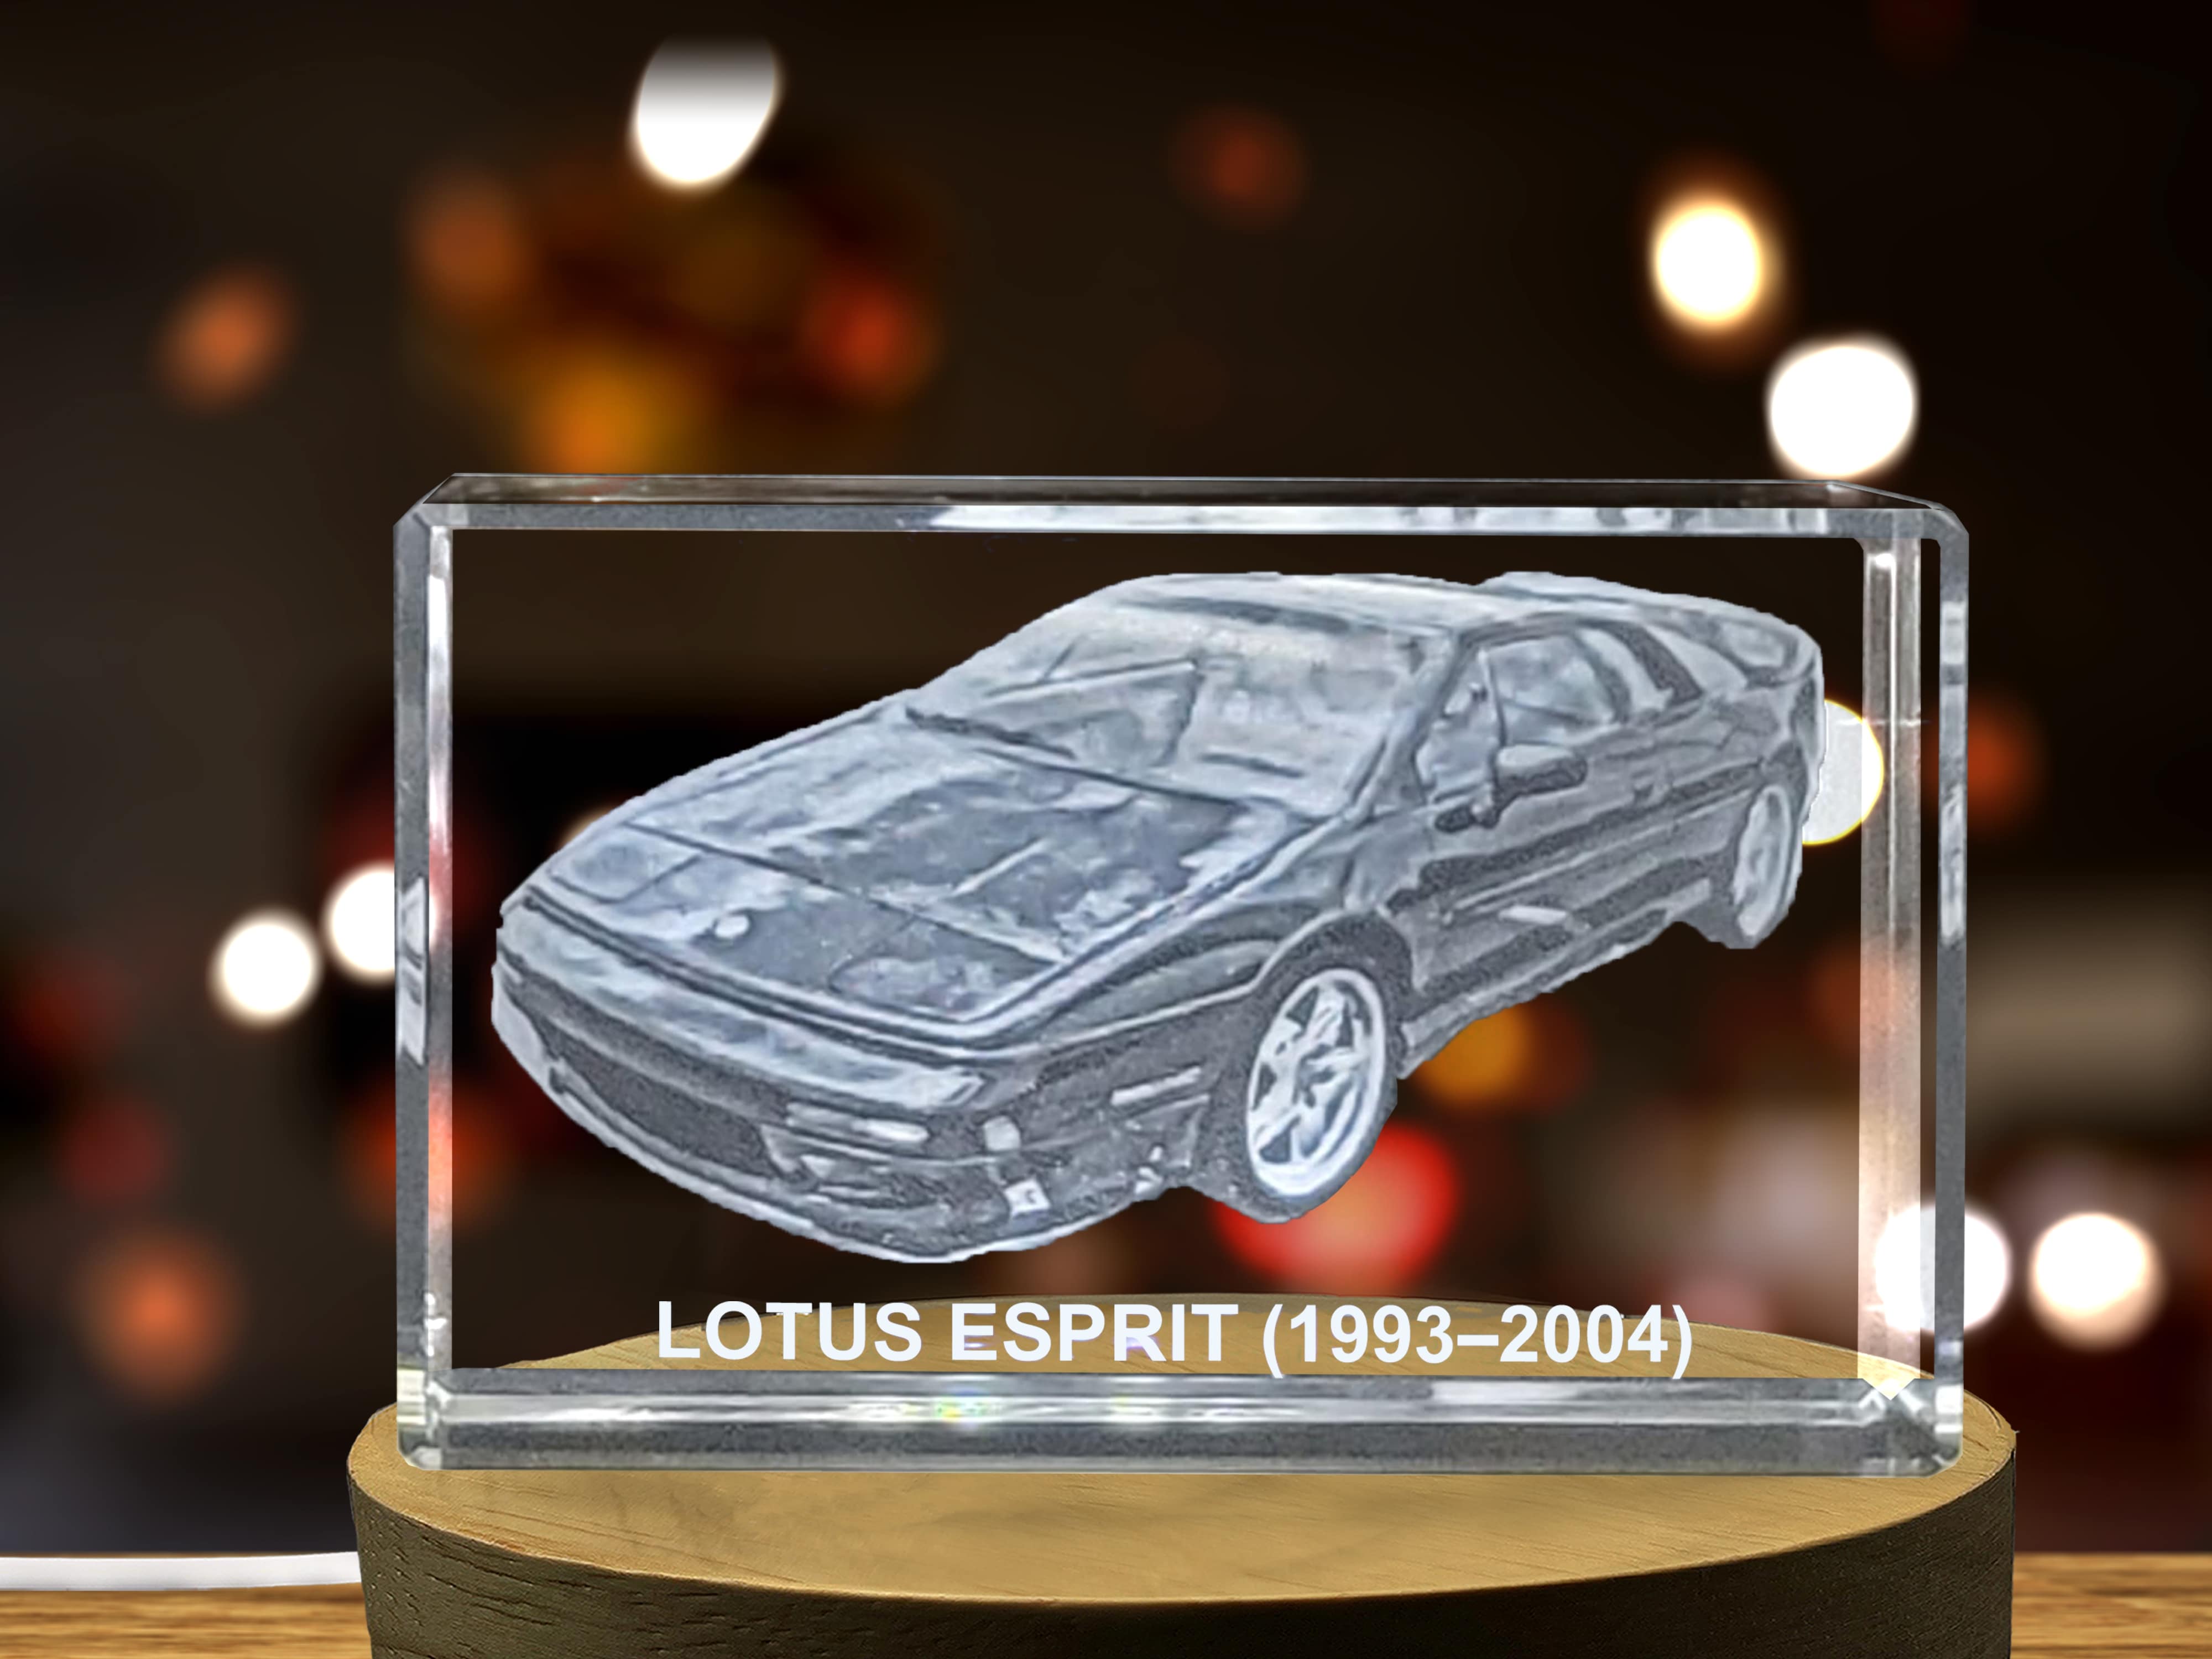 Exquisite 3D Engraved Crystal of the Iconic 1993-2004 Lotus Esprit Sports Car A&B Crystal Collection